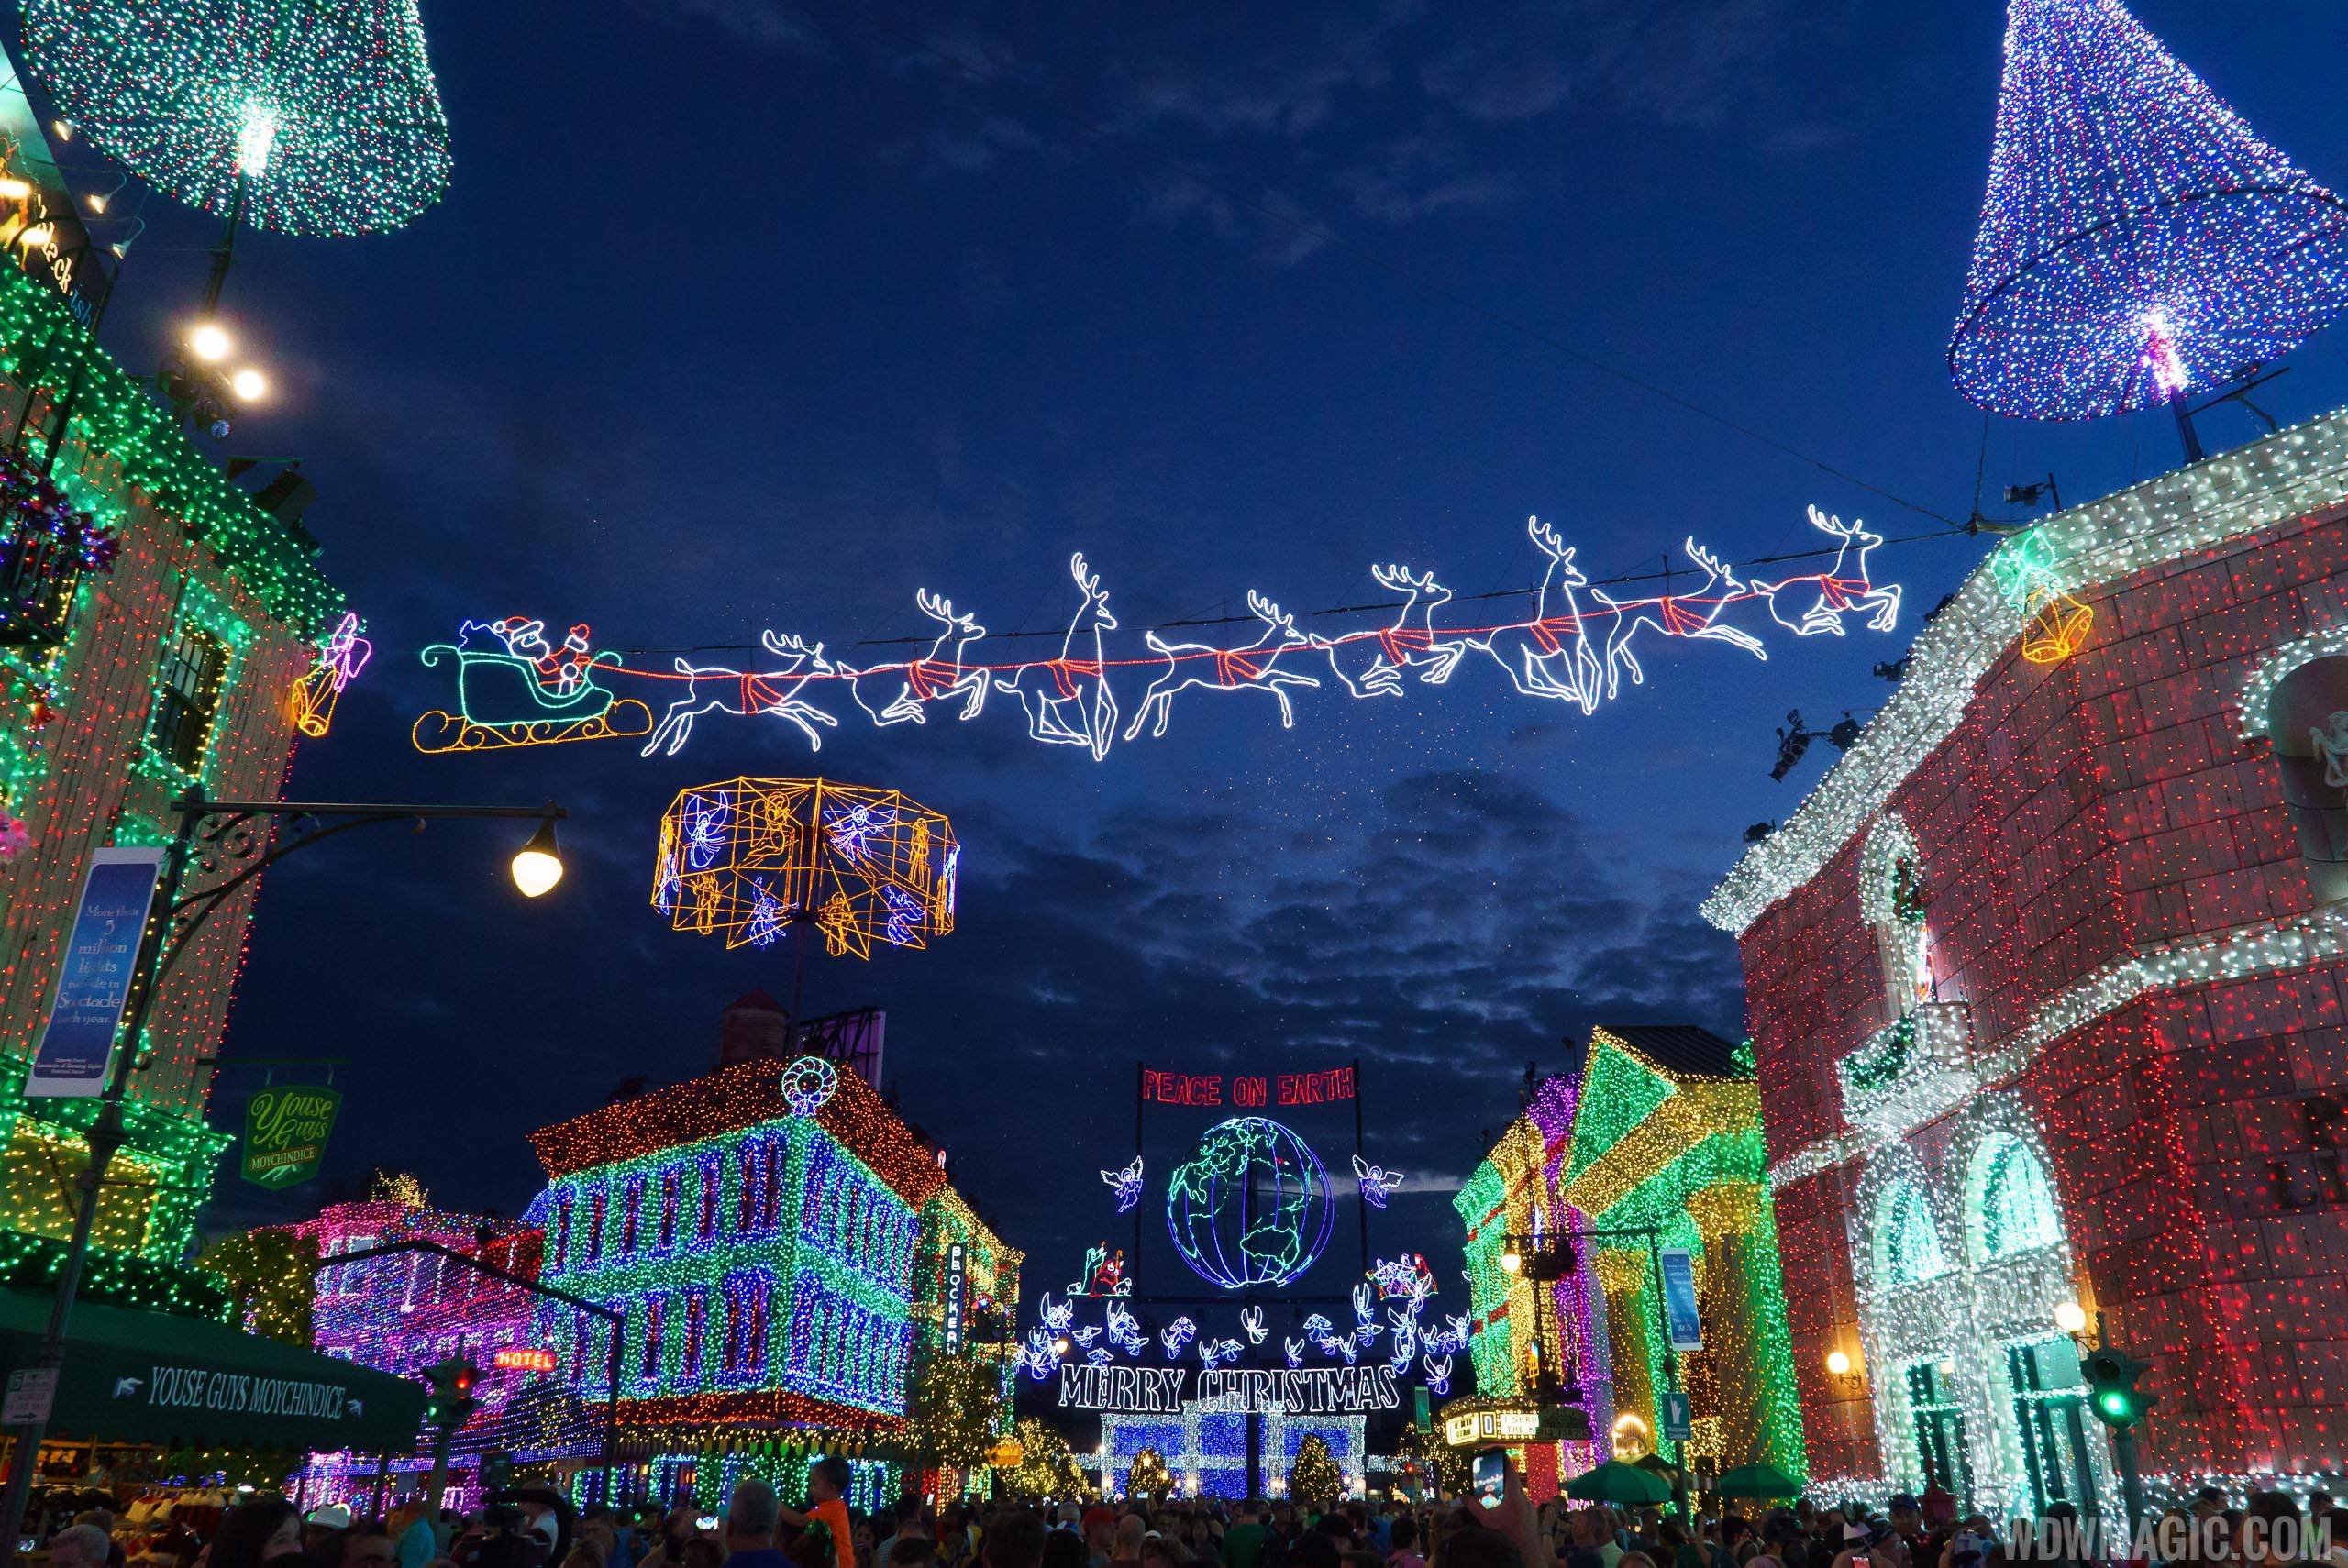 Osborne Family Spectacle of Dancing Lights 2015 show